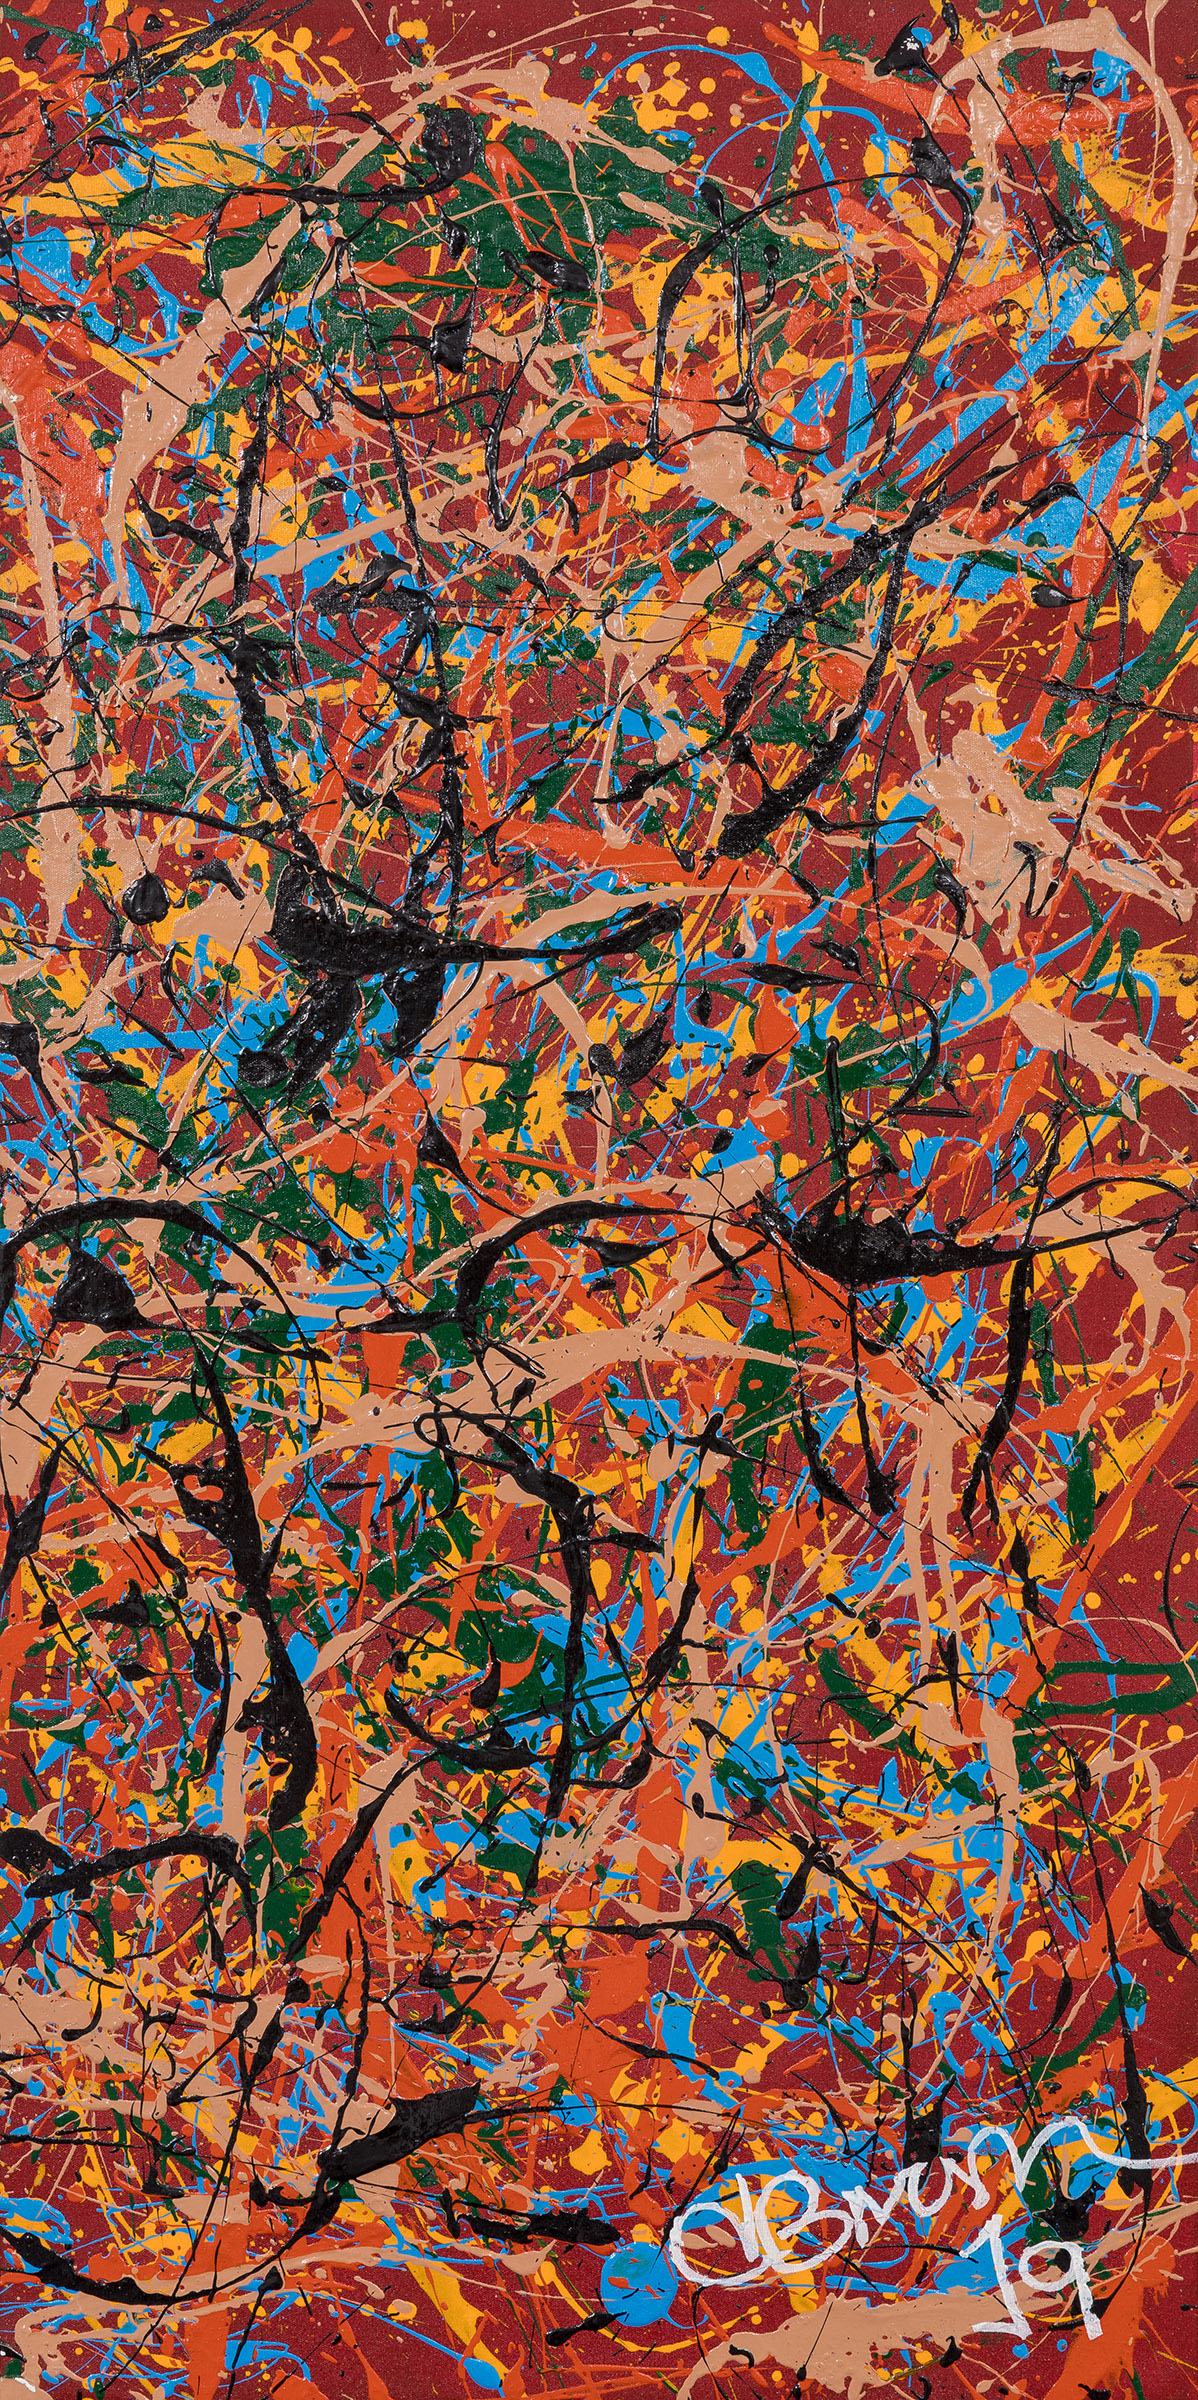 DAVID BRUSH (Madrid). "Pollock as pretext". Mixed media on canvas glued to board. Signed and dated